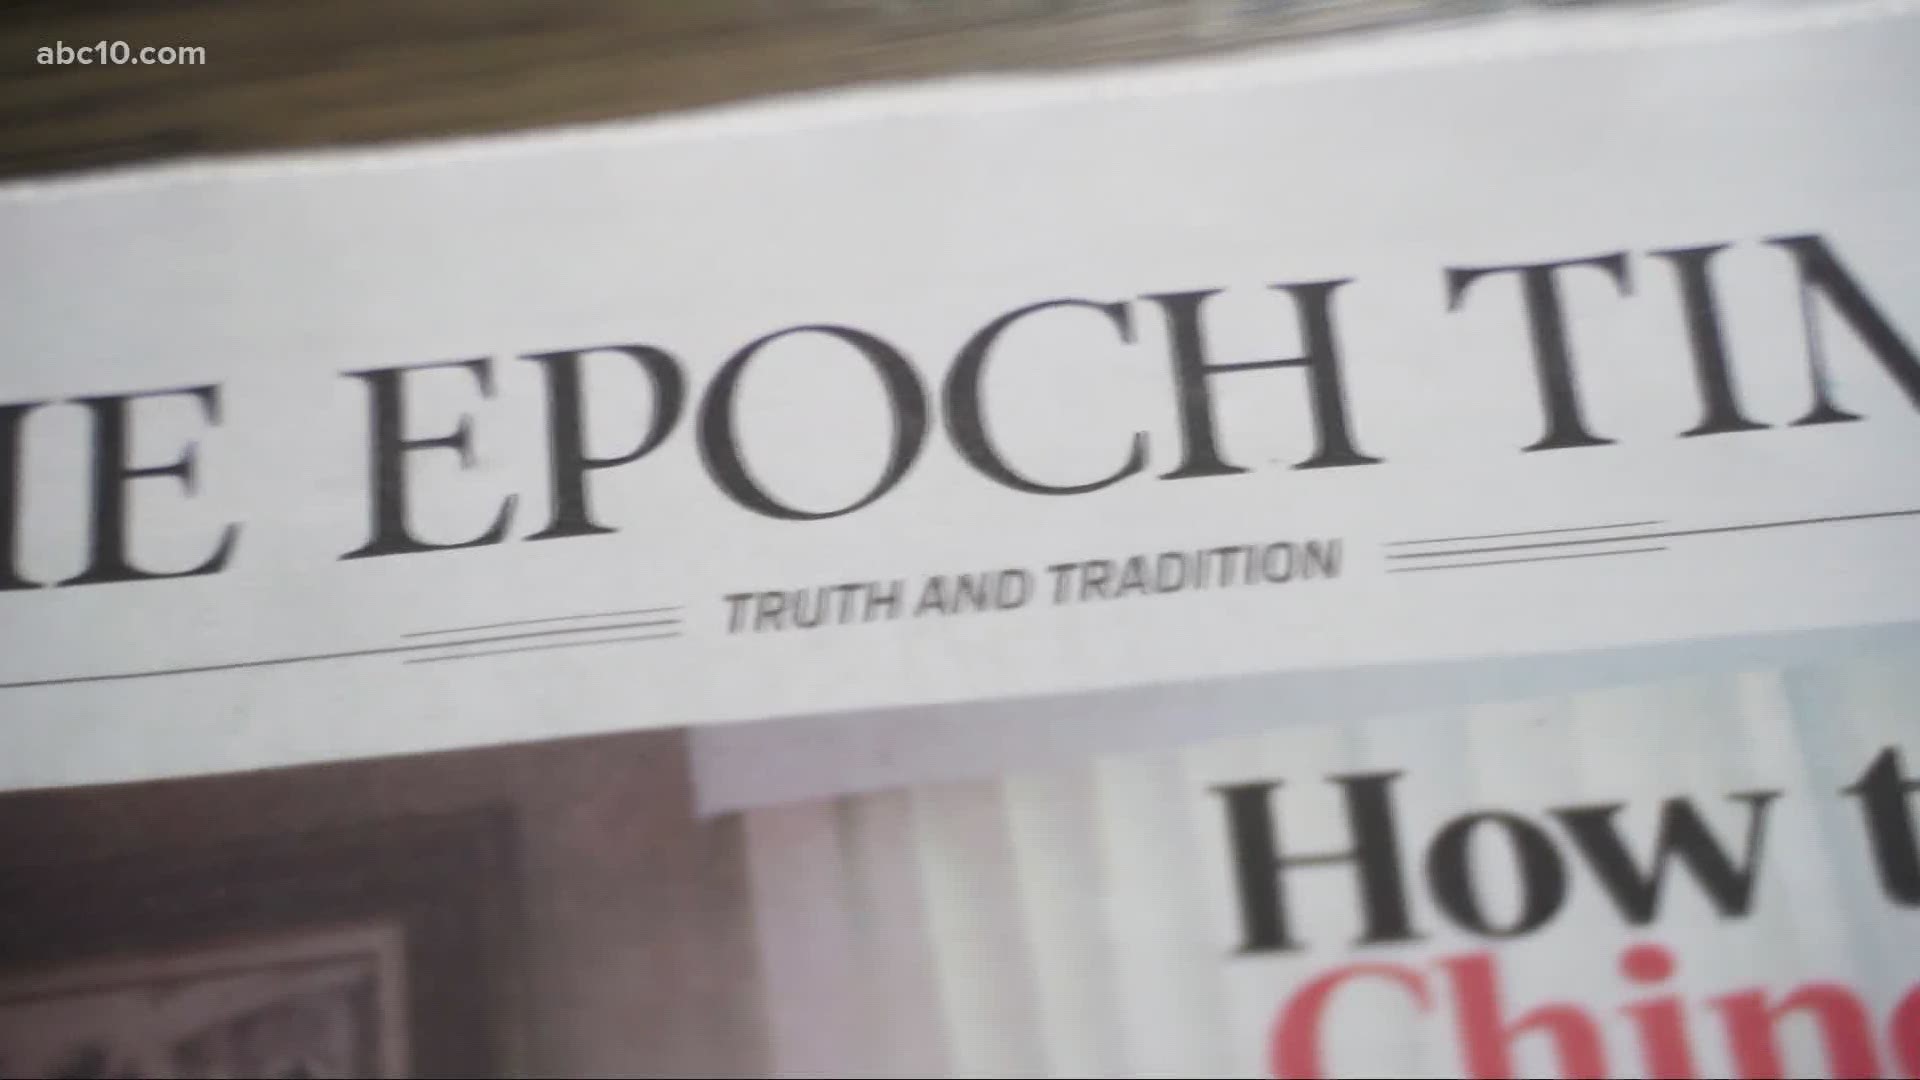 The Epoch Times newspaper has made its way into mailboxes of many North American homes, but many of the claims it makes are false.